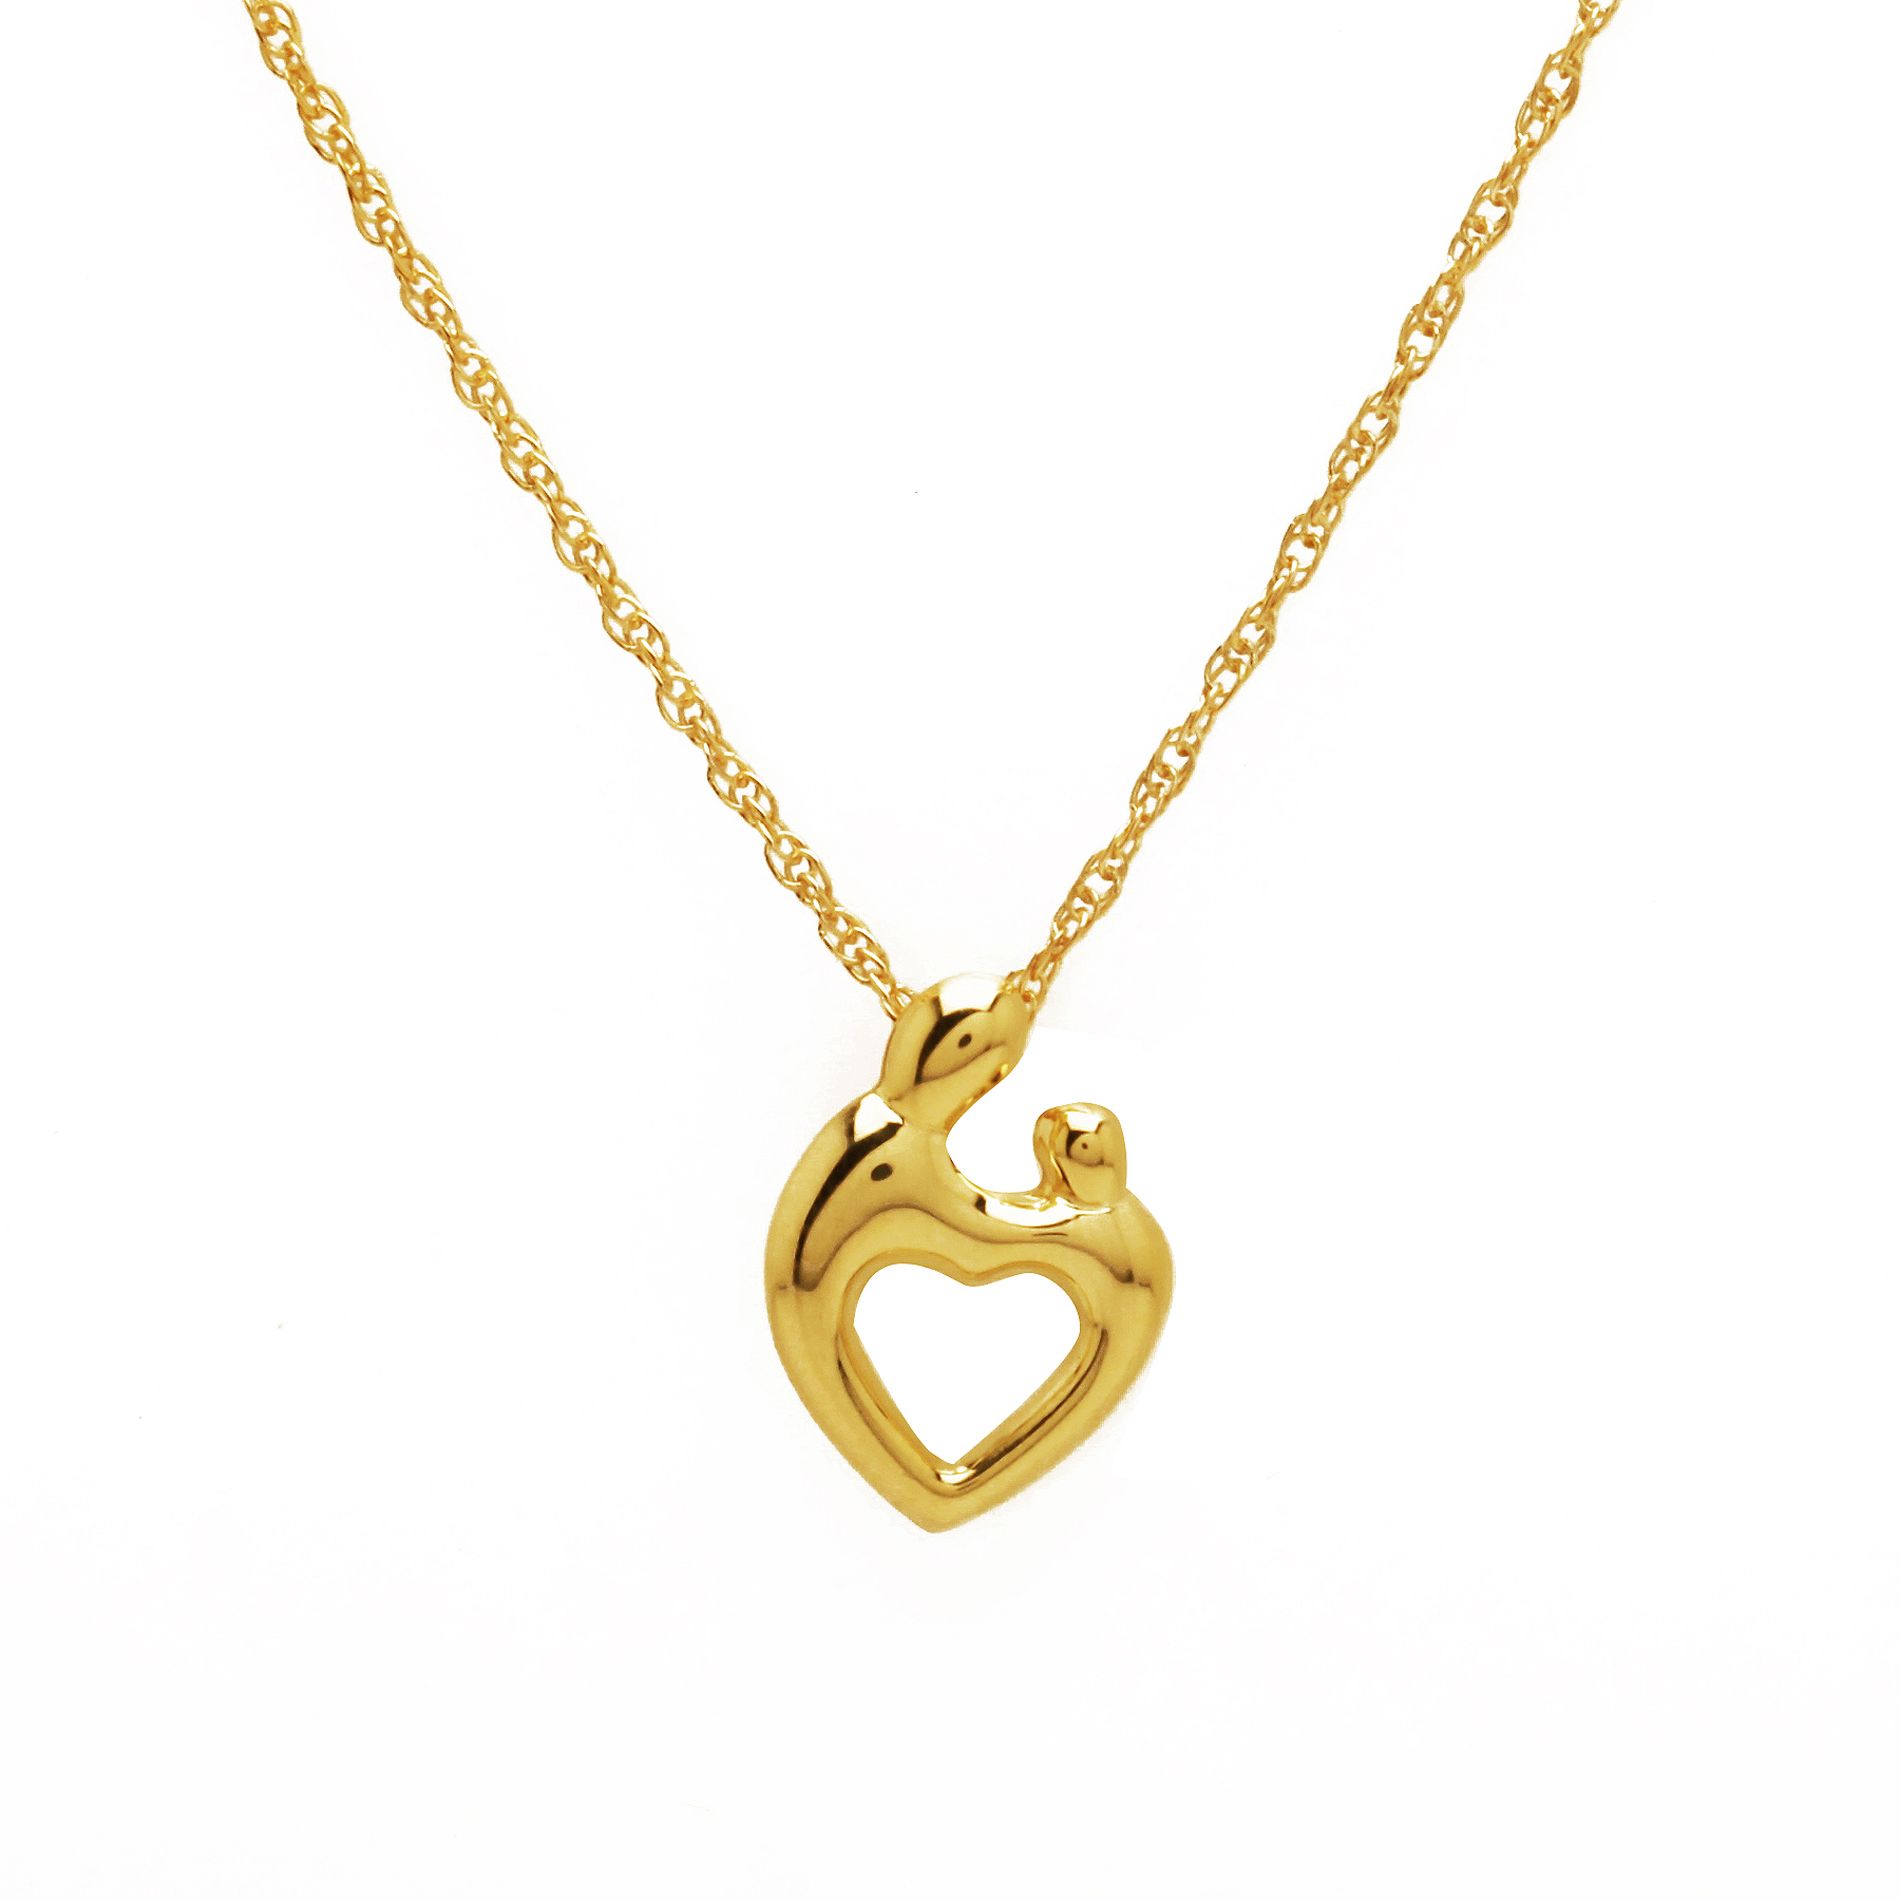 Mother and Child Heart Pendant in 10K Gold